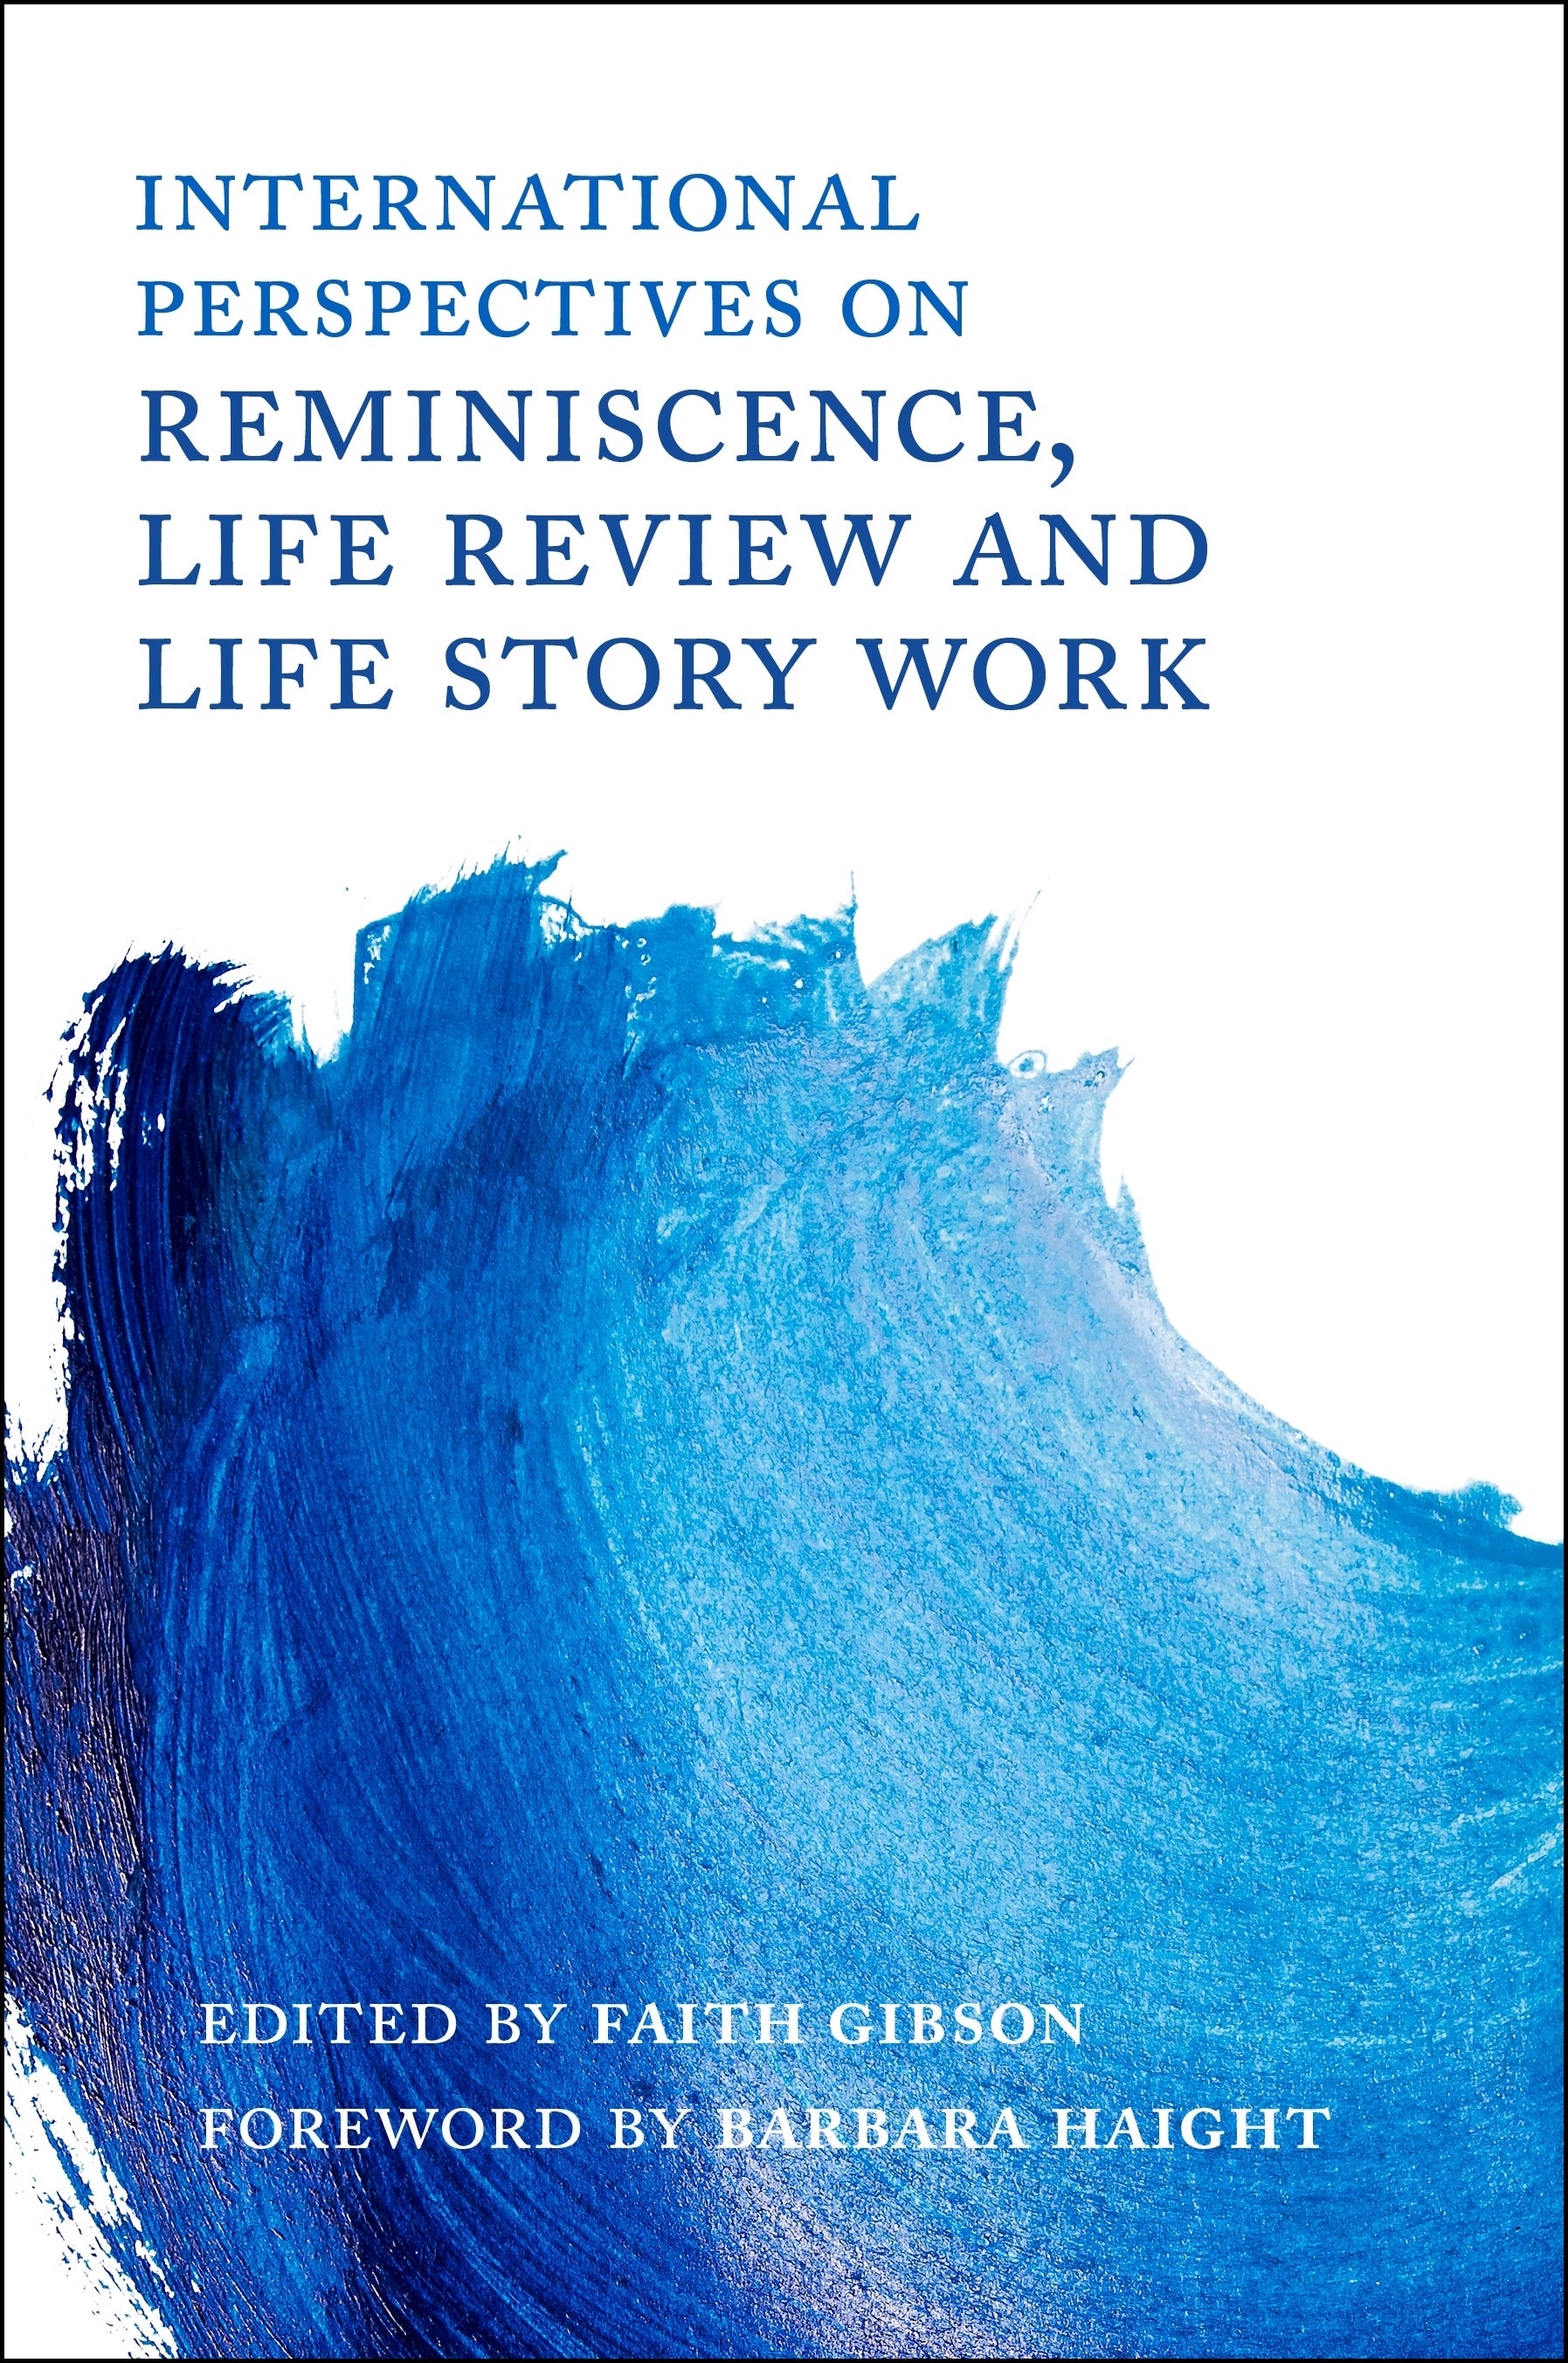 International Perspectives on Reminiscence, Life Review and Life Story Work by No Author Listed, Barbara Haight, Faith Gibson